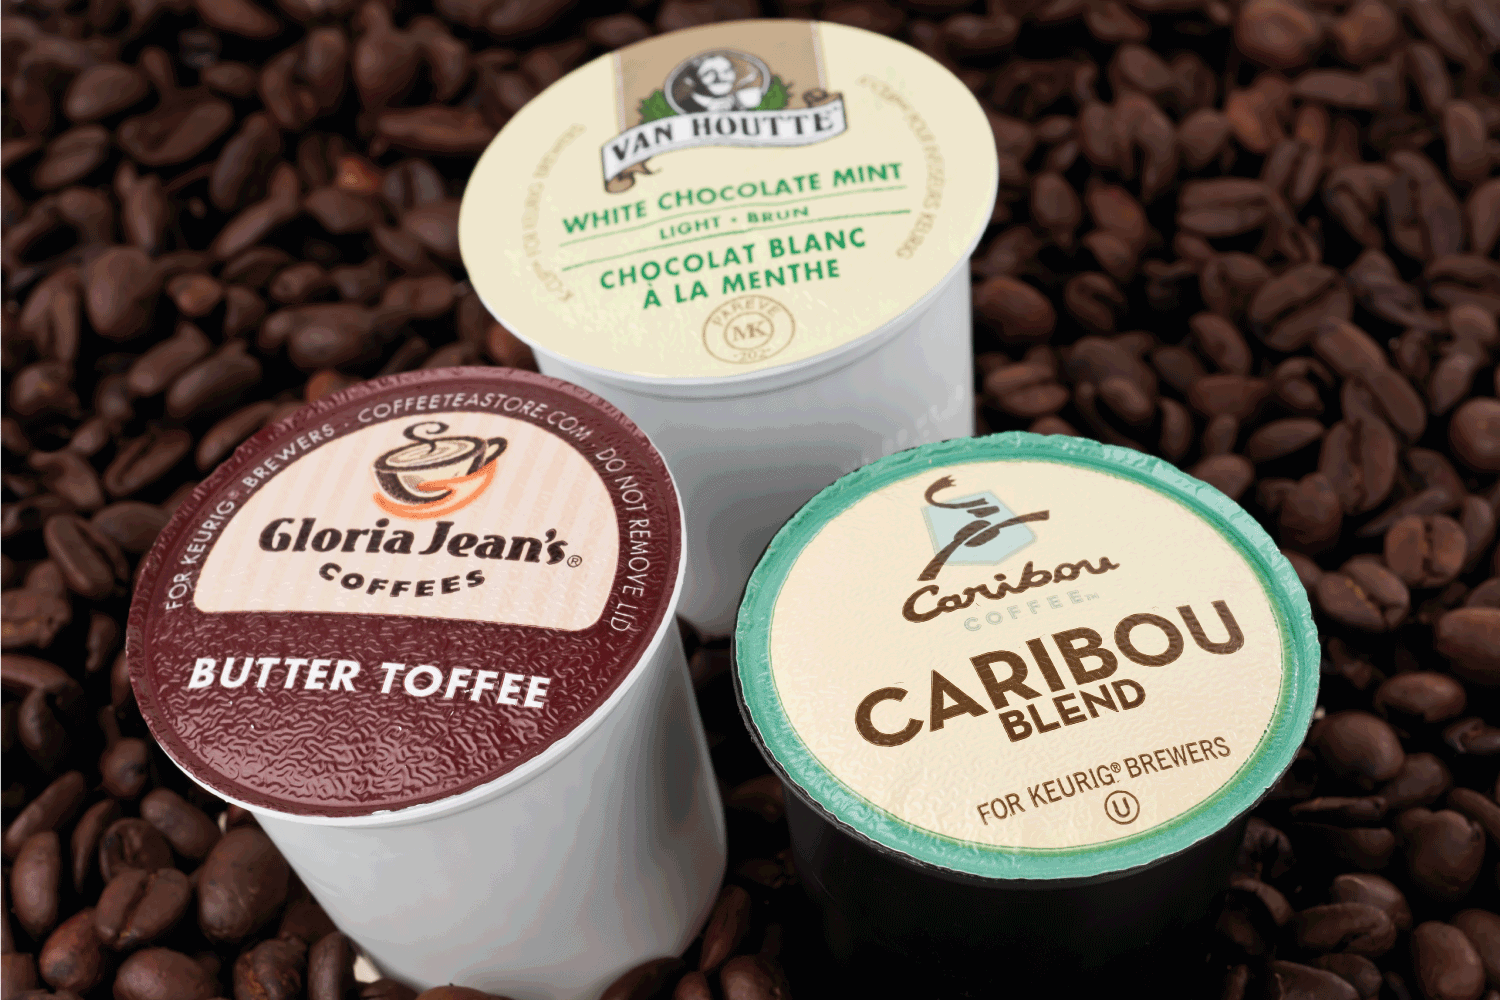 A variety of k-cups used for the Keurig single serve coffee maker placed on a bag of roasted coffee beans